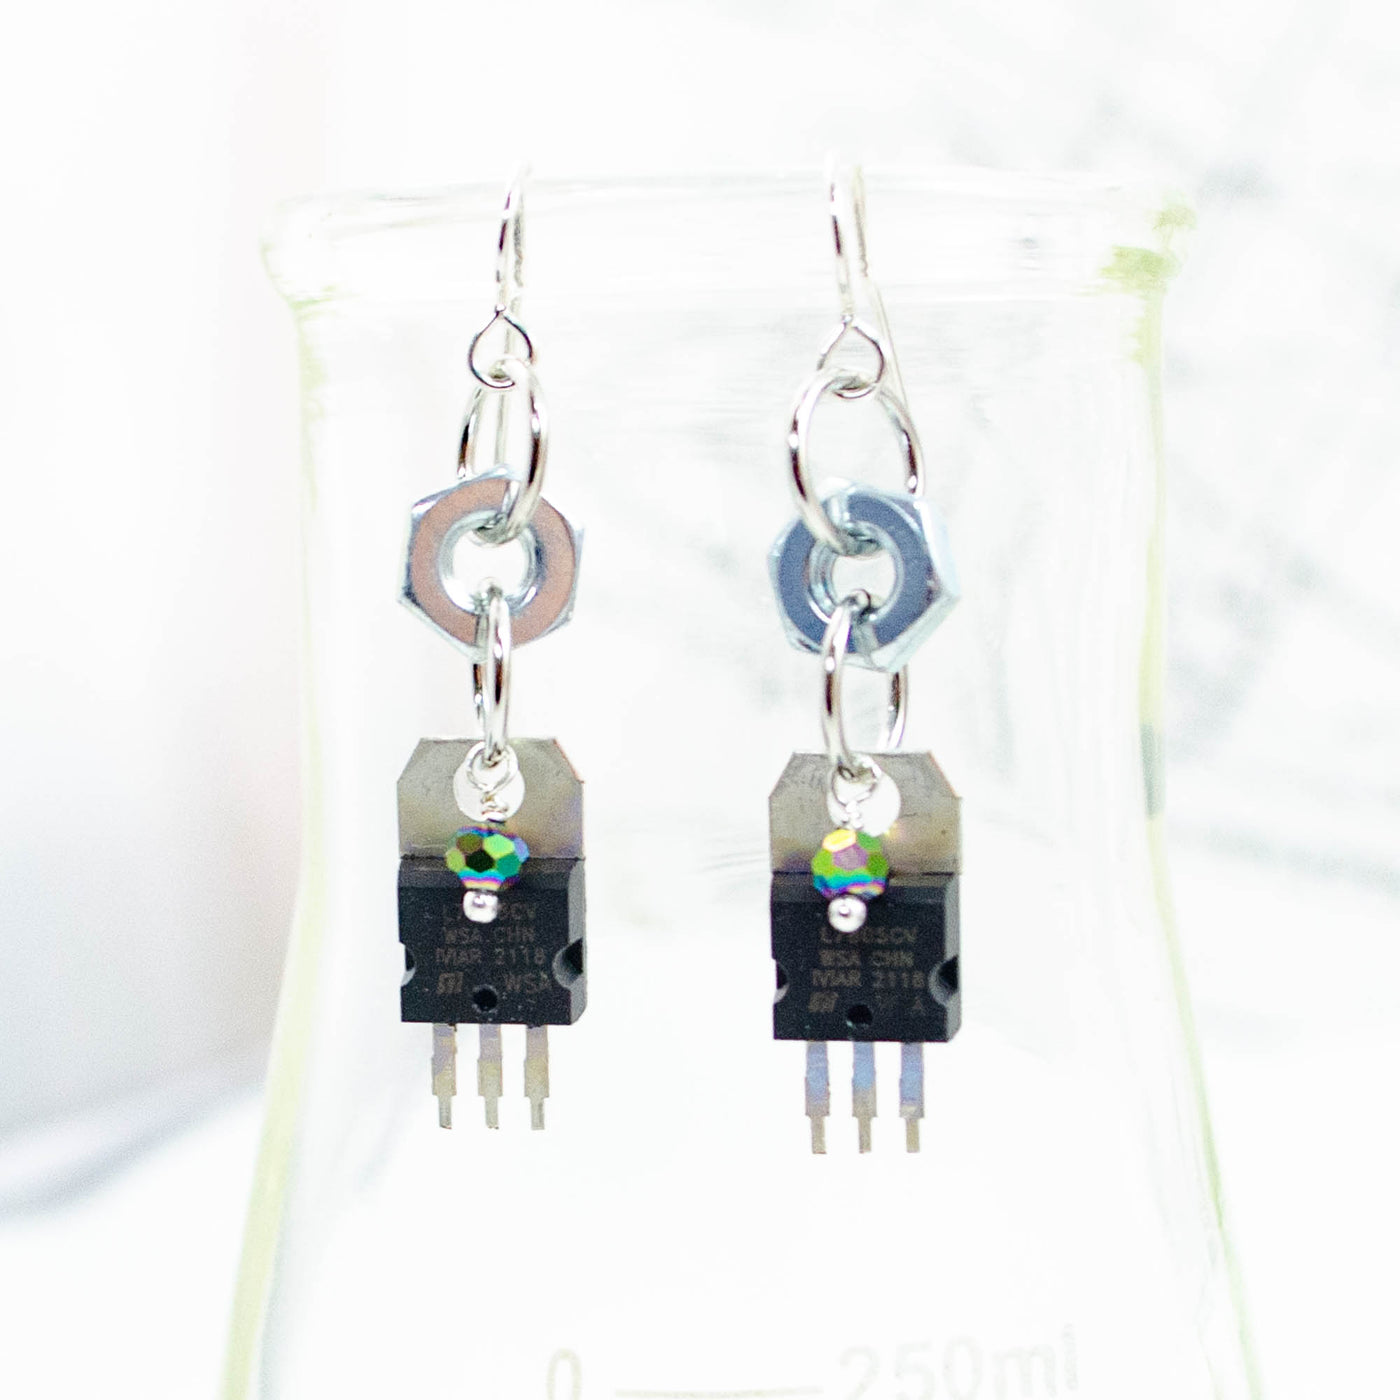 Electronic Component Earrings - Voltage Regulators and Hardware